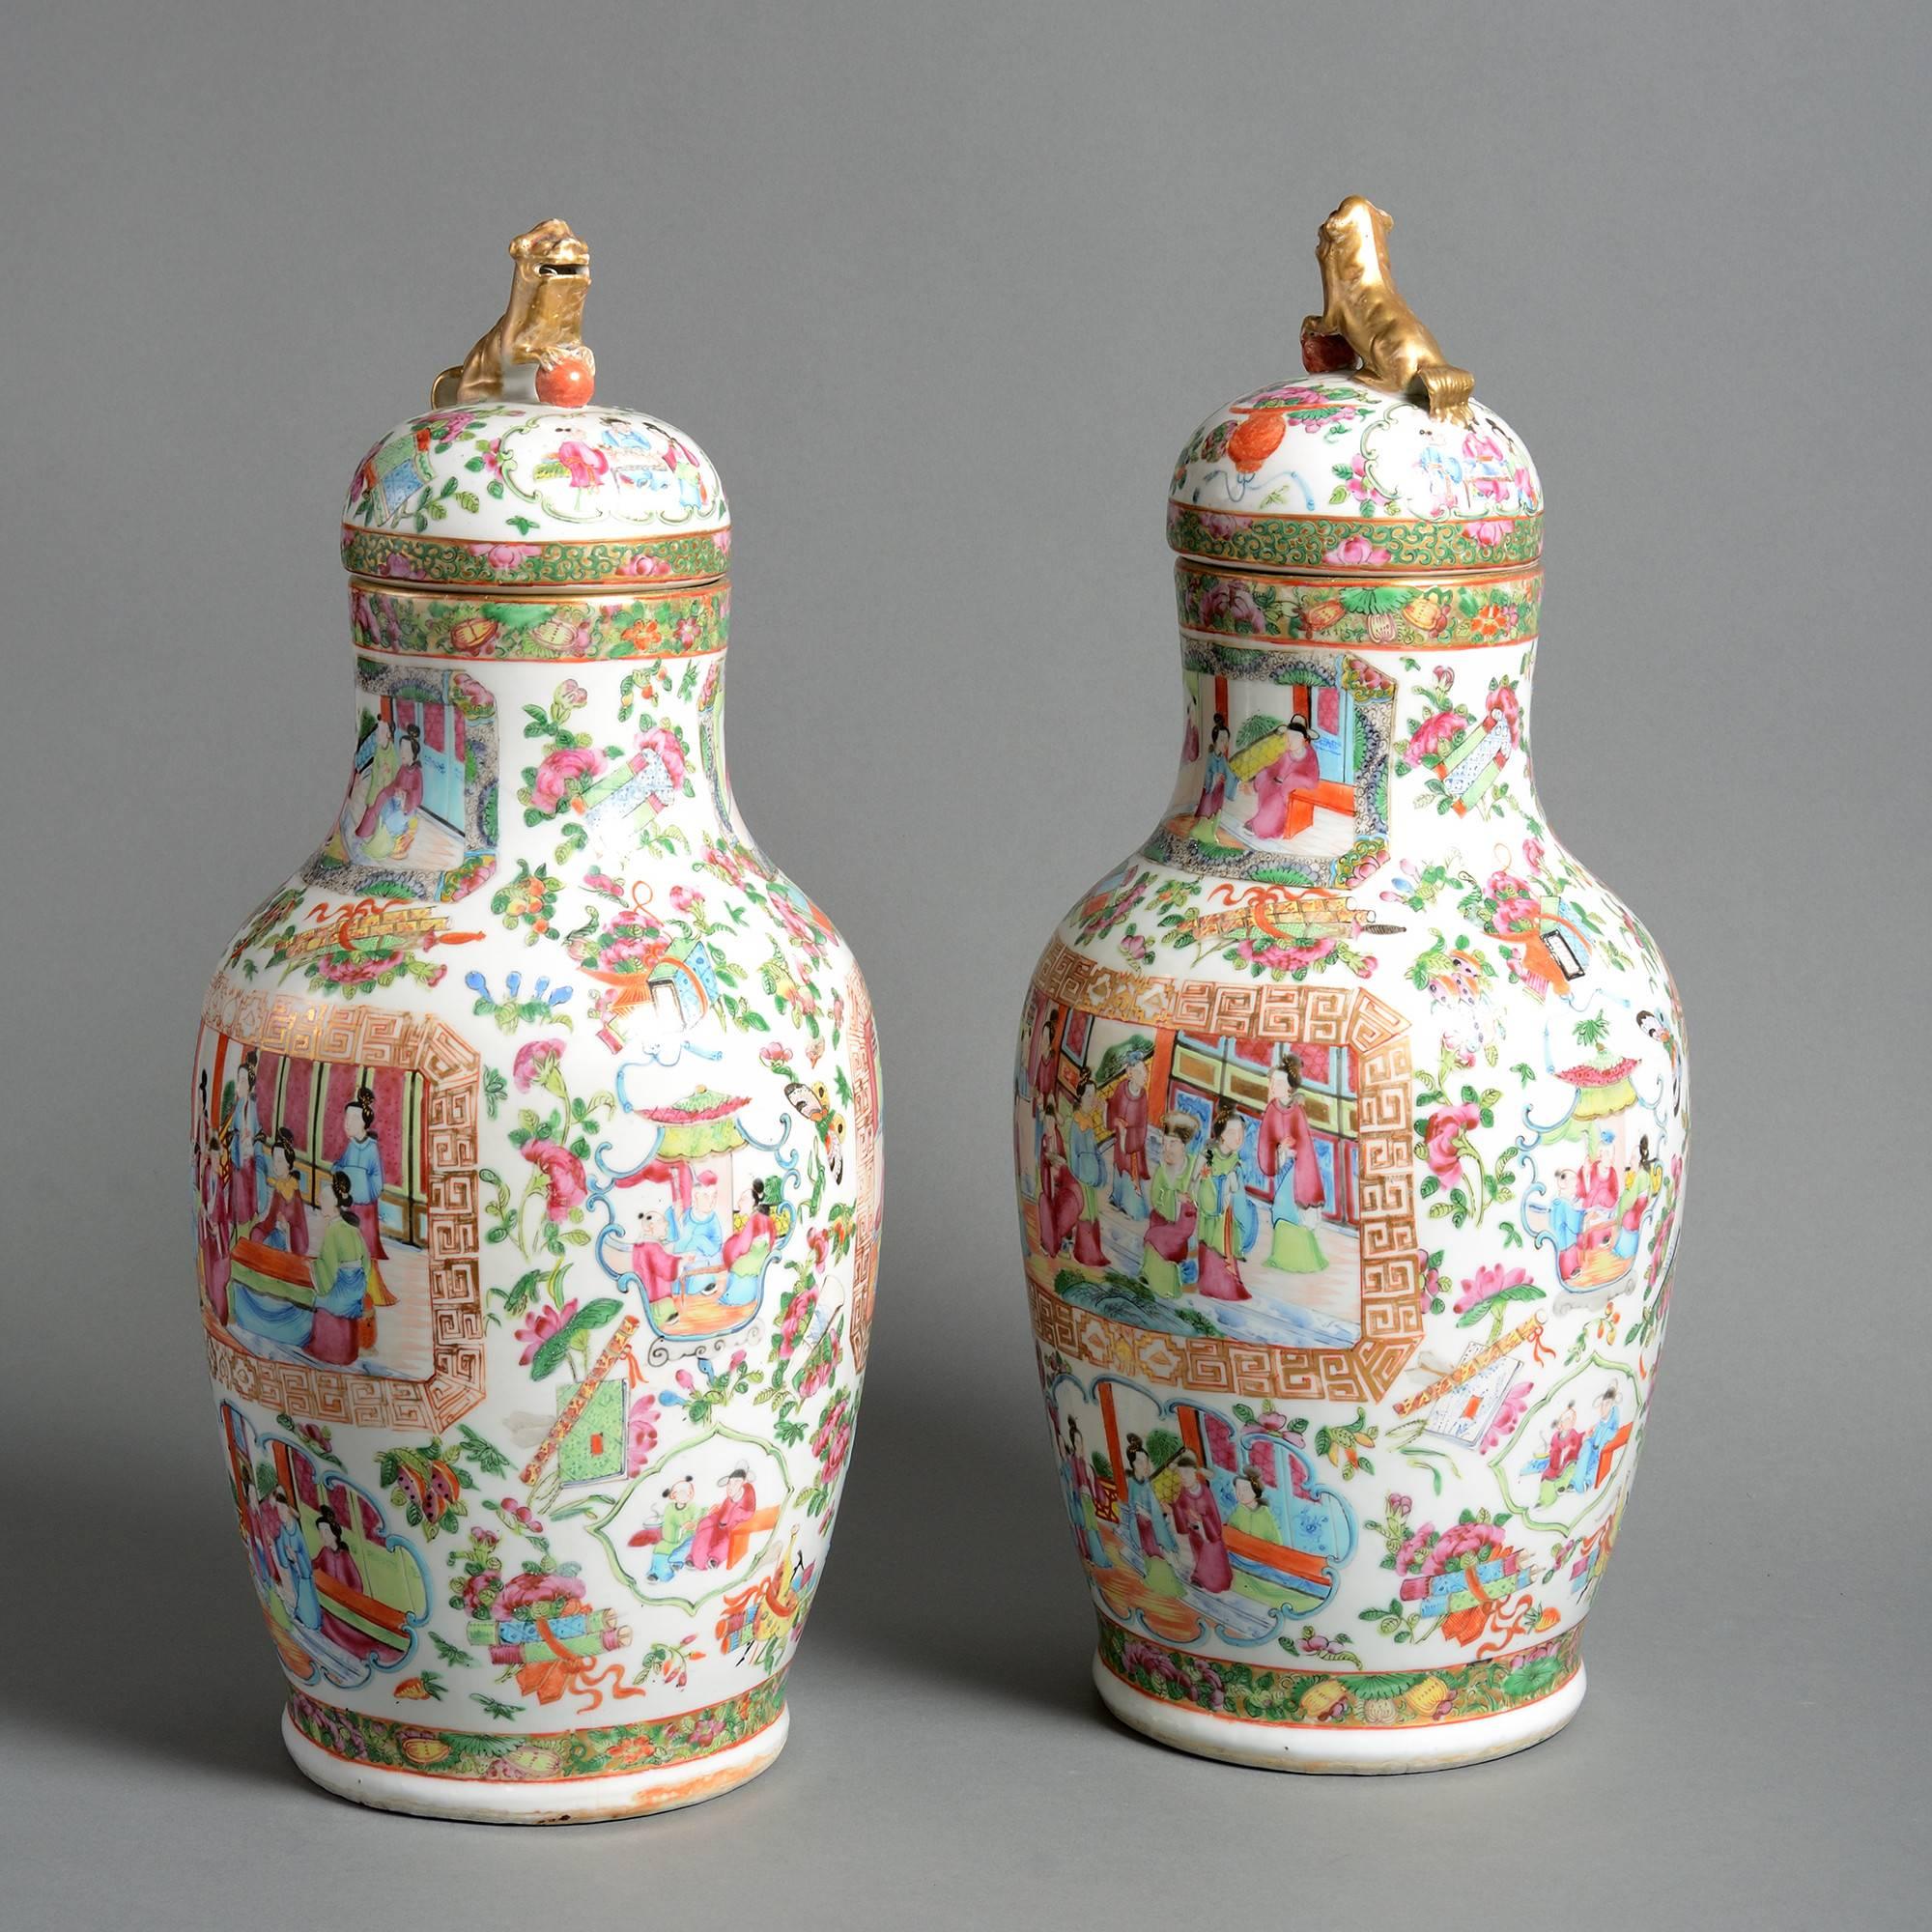 A pair of late 19th century Canton porcelain vases, decorated with panels depicting courtly scenes in famille rose glazes upon a white ground, the domed lids surmounted with gilded lions. 

Qing dynasty, Guangxu Period (1875-1908).

Condition: